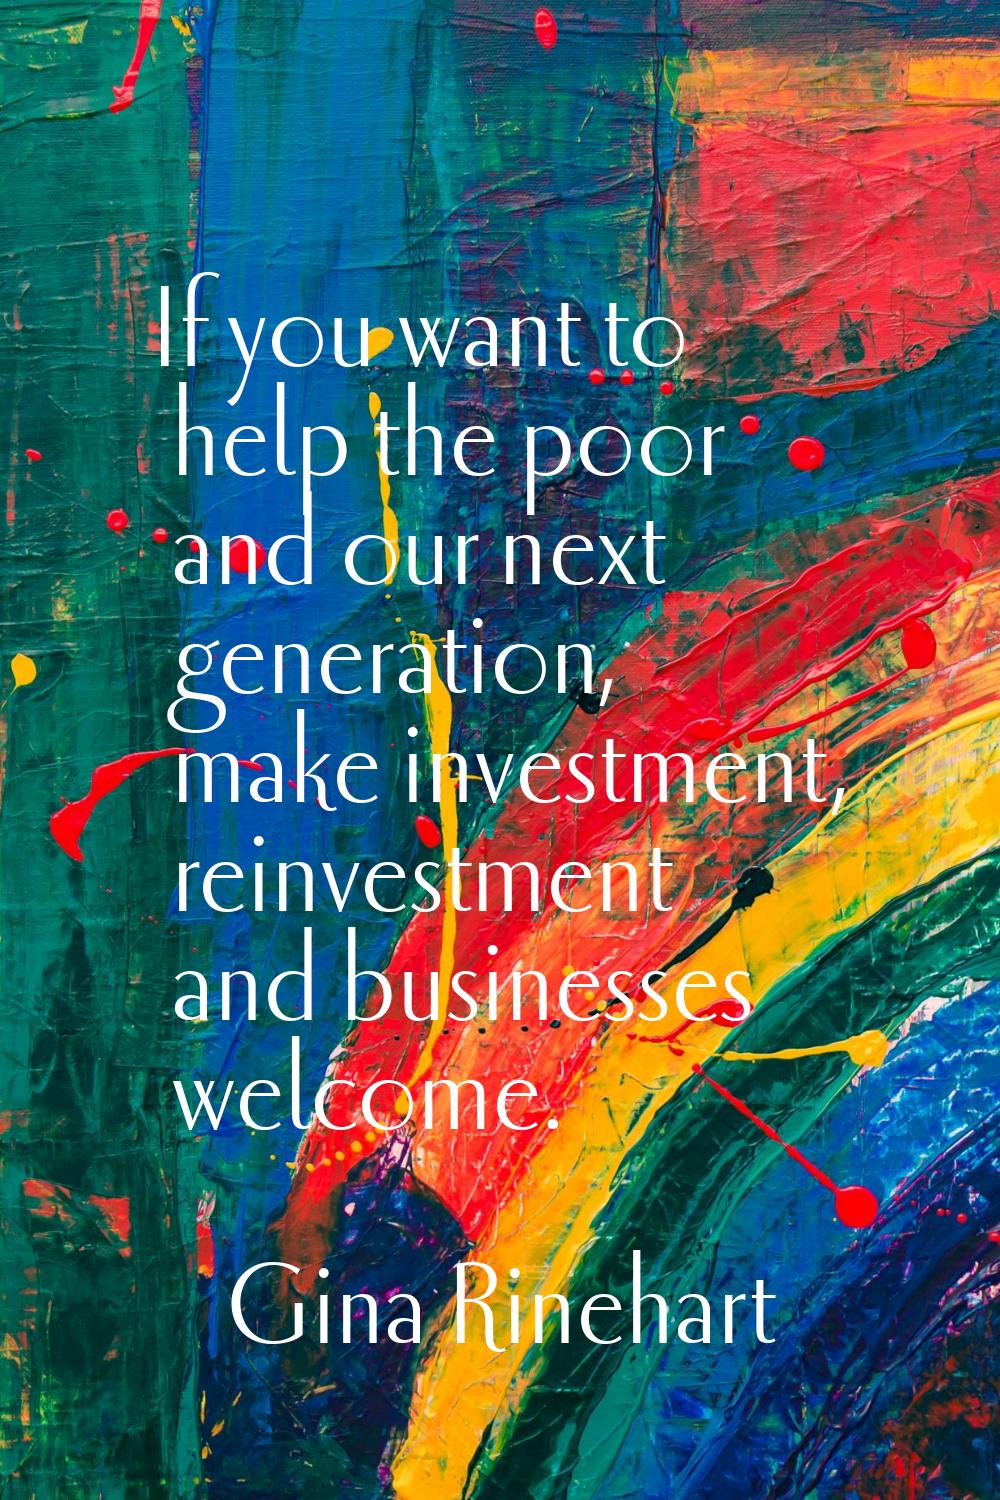 If you want to help the poor and our next generation, make investment, reinvestment and businesses 